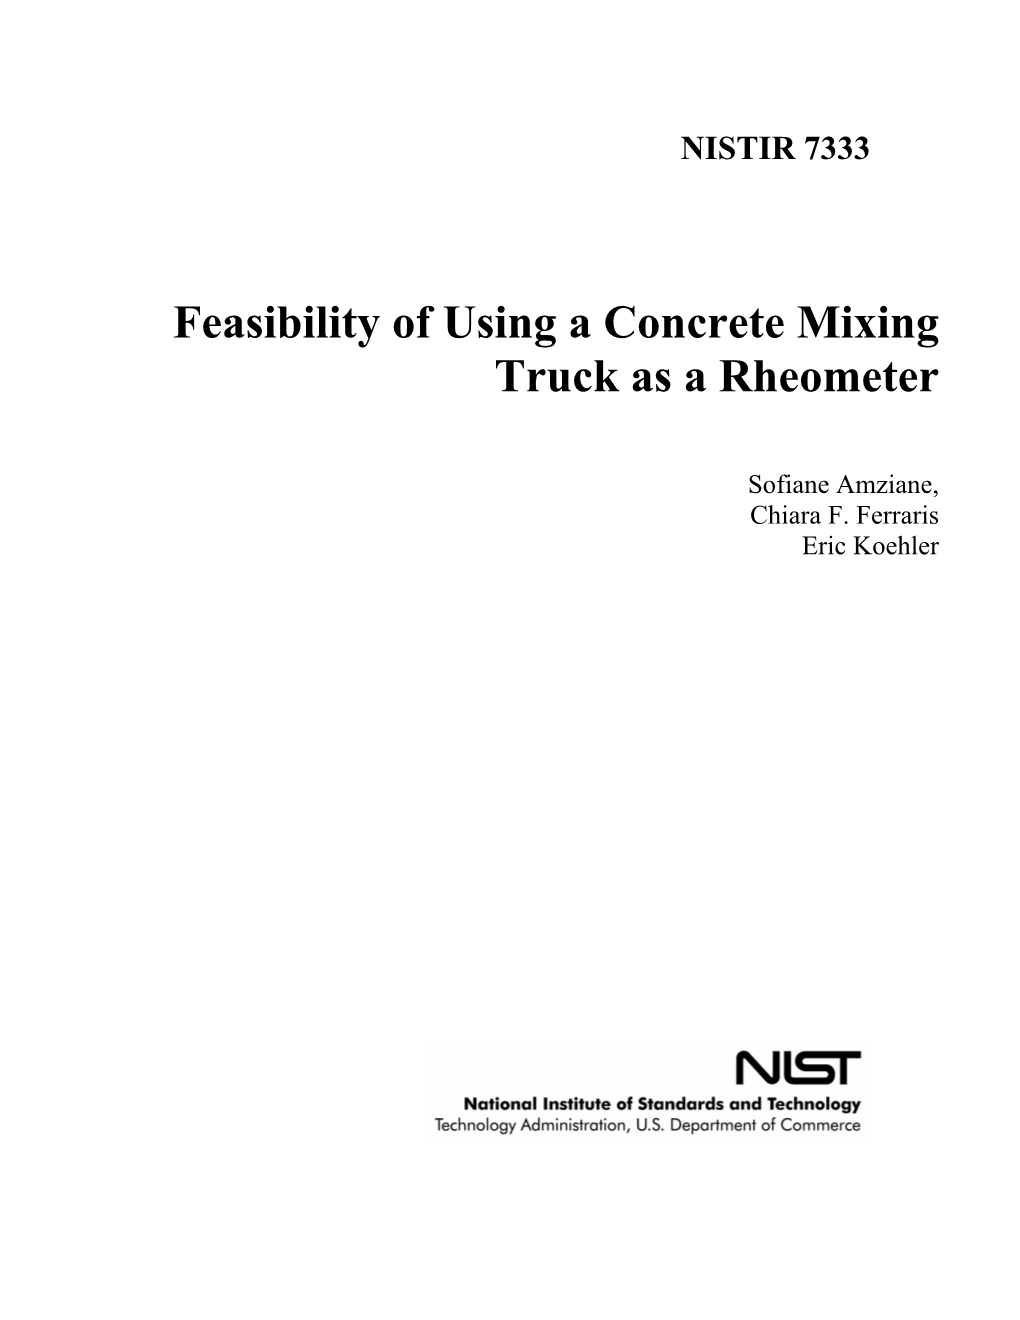 Feasibility of Using a Concrete Mixing Truck As a Rheometer